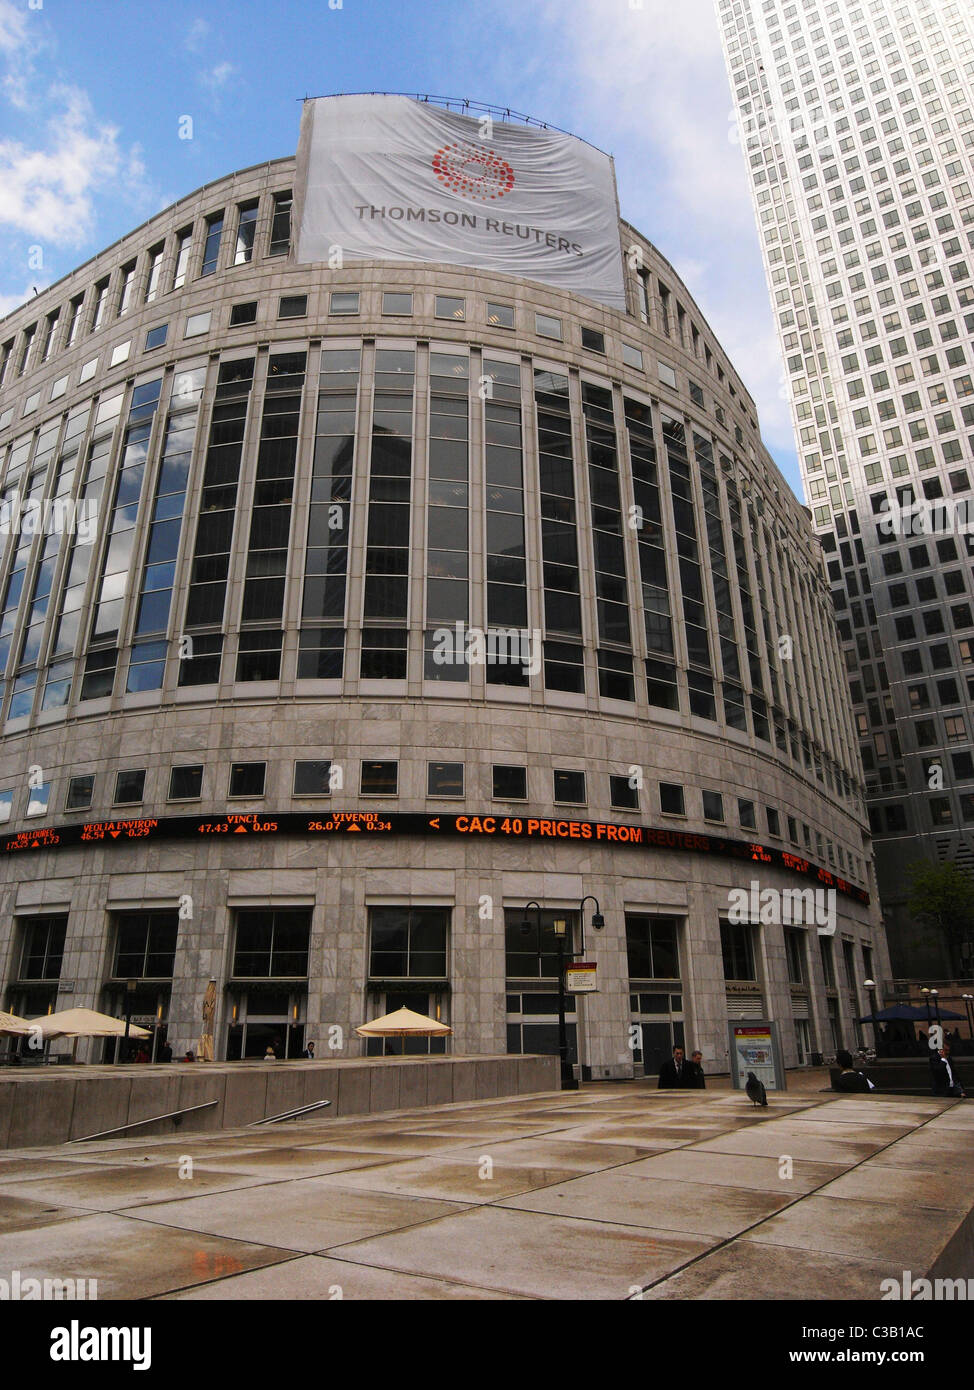 Thomson Reuters Building in London. Stock Photo